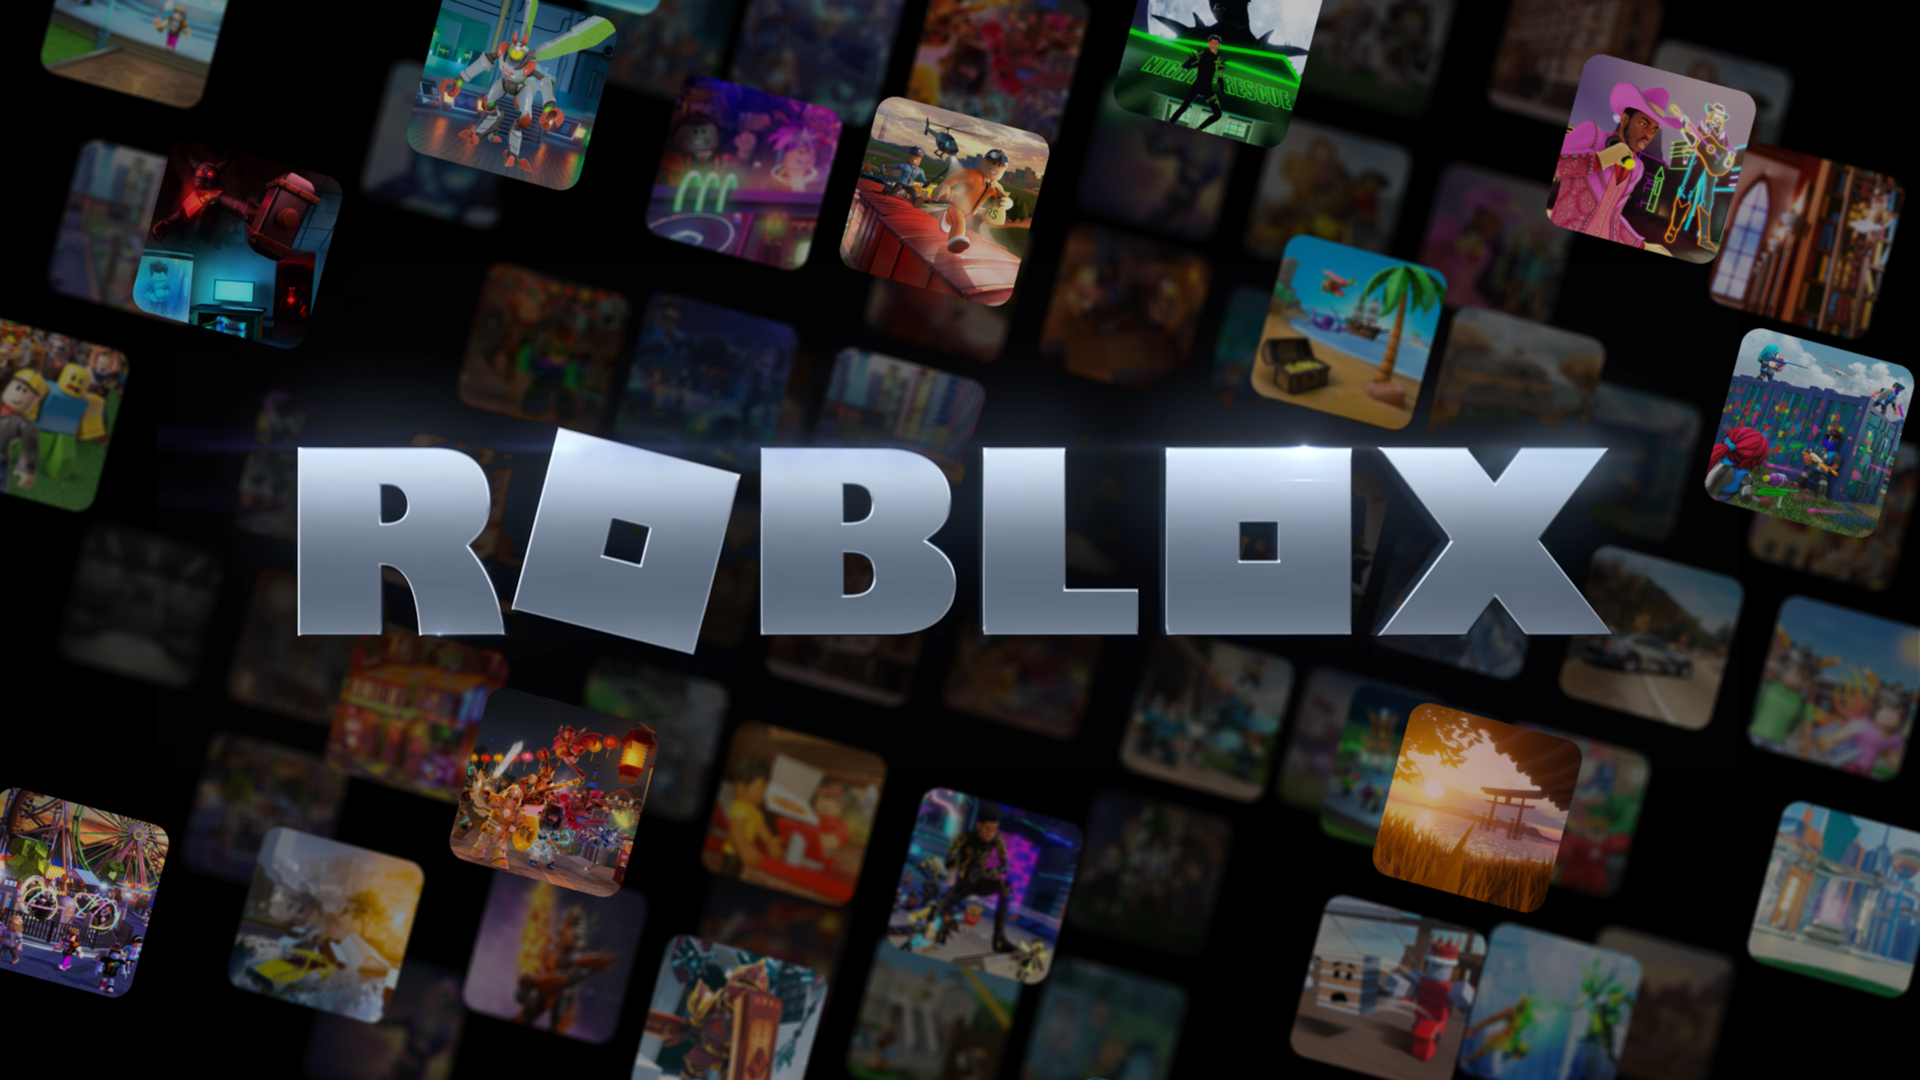 Internal Roblox documents posted online after employee phishing scam